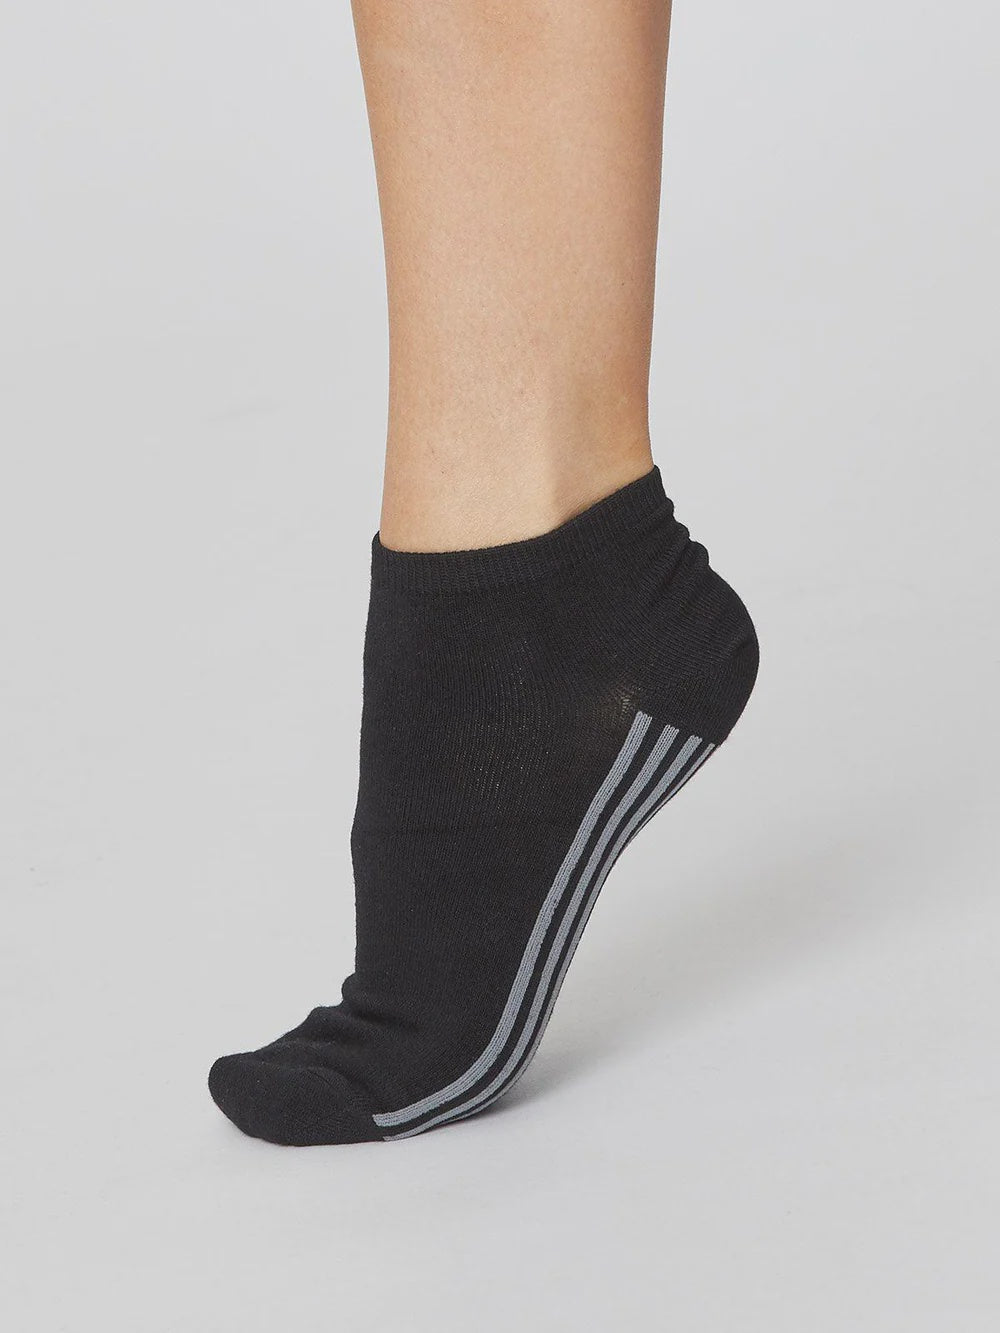 Thought Solid Jane Bamboo Trainer Socks Black 4-7